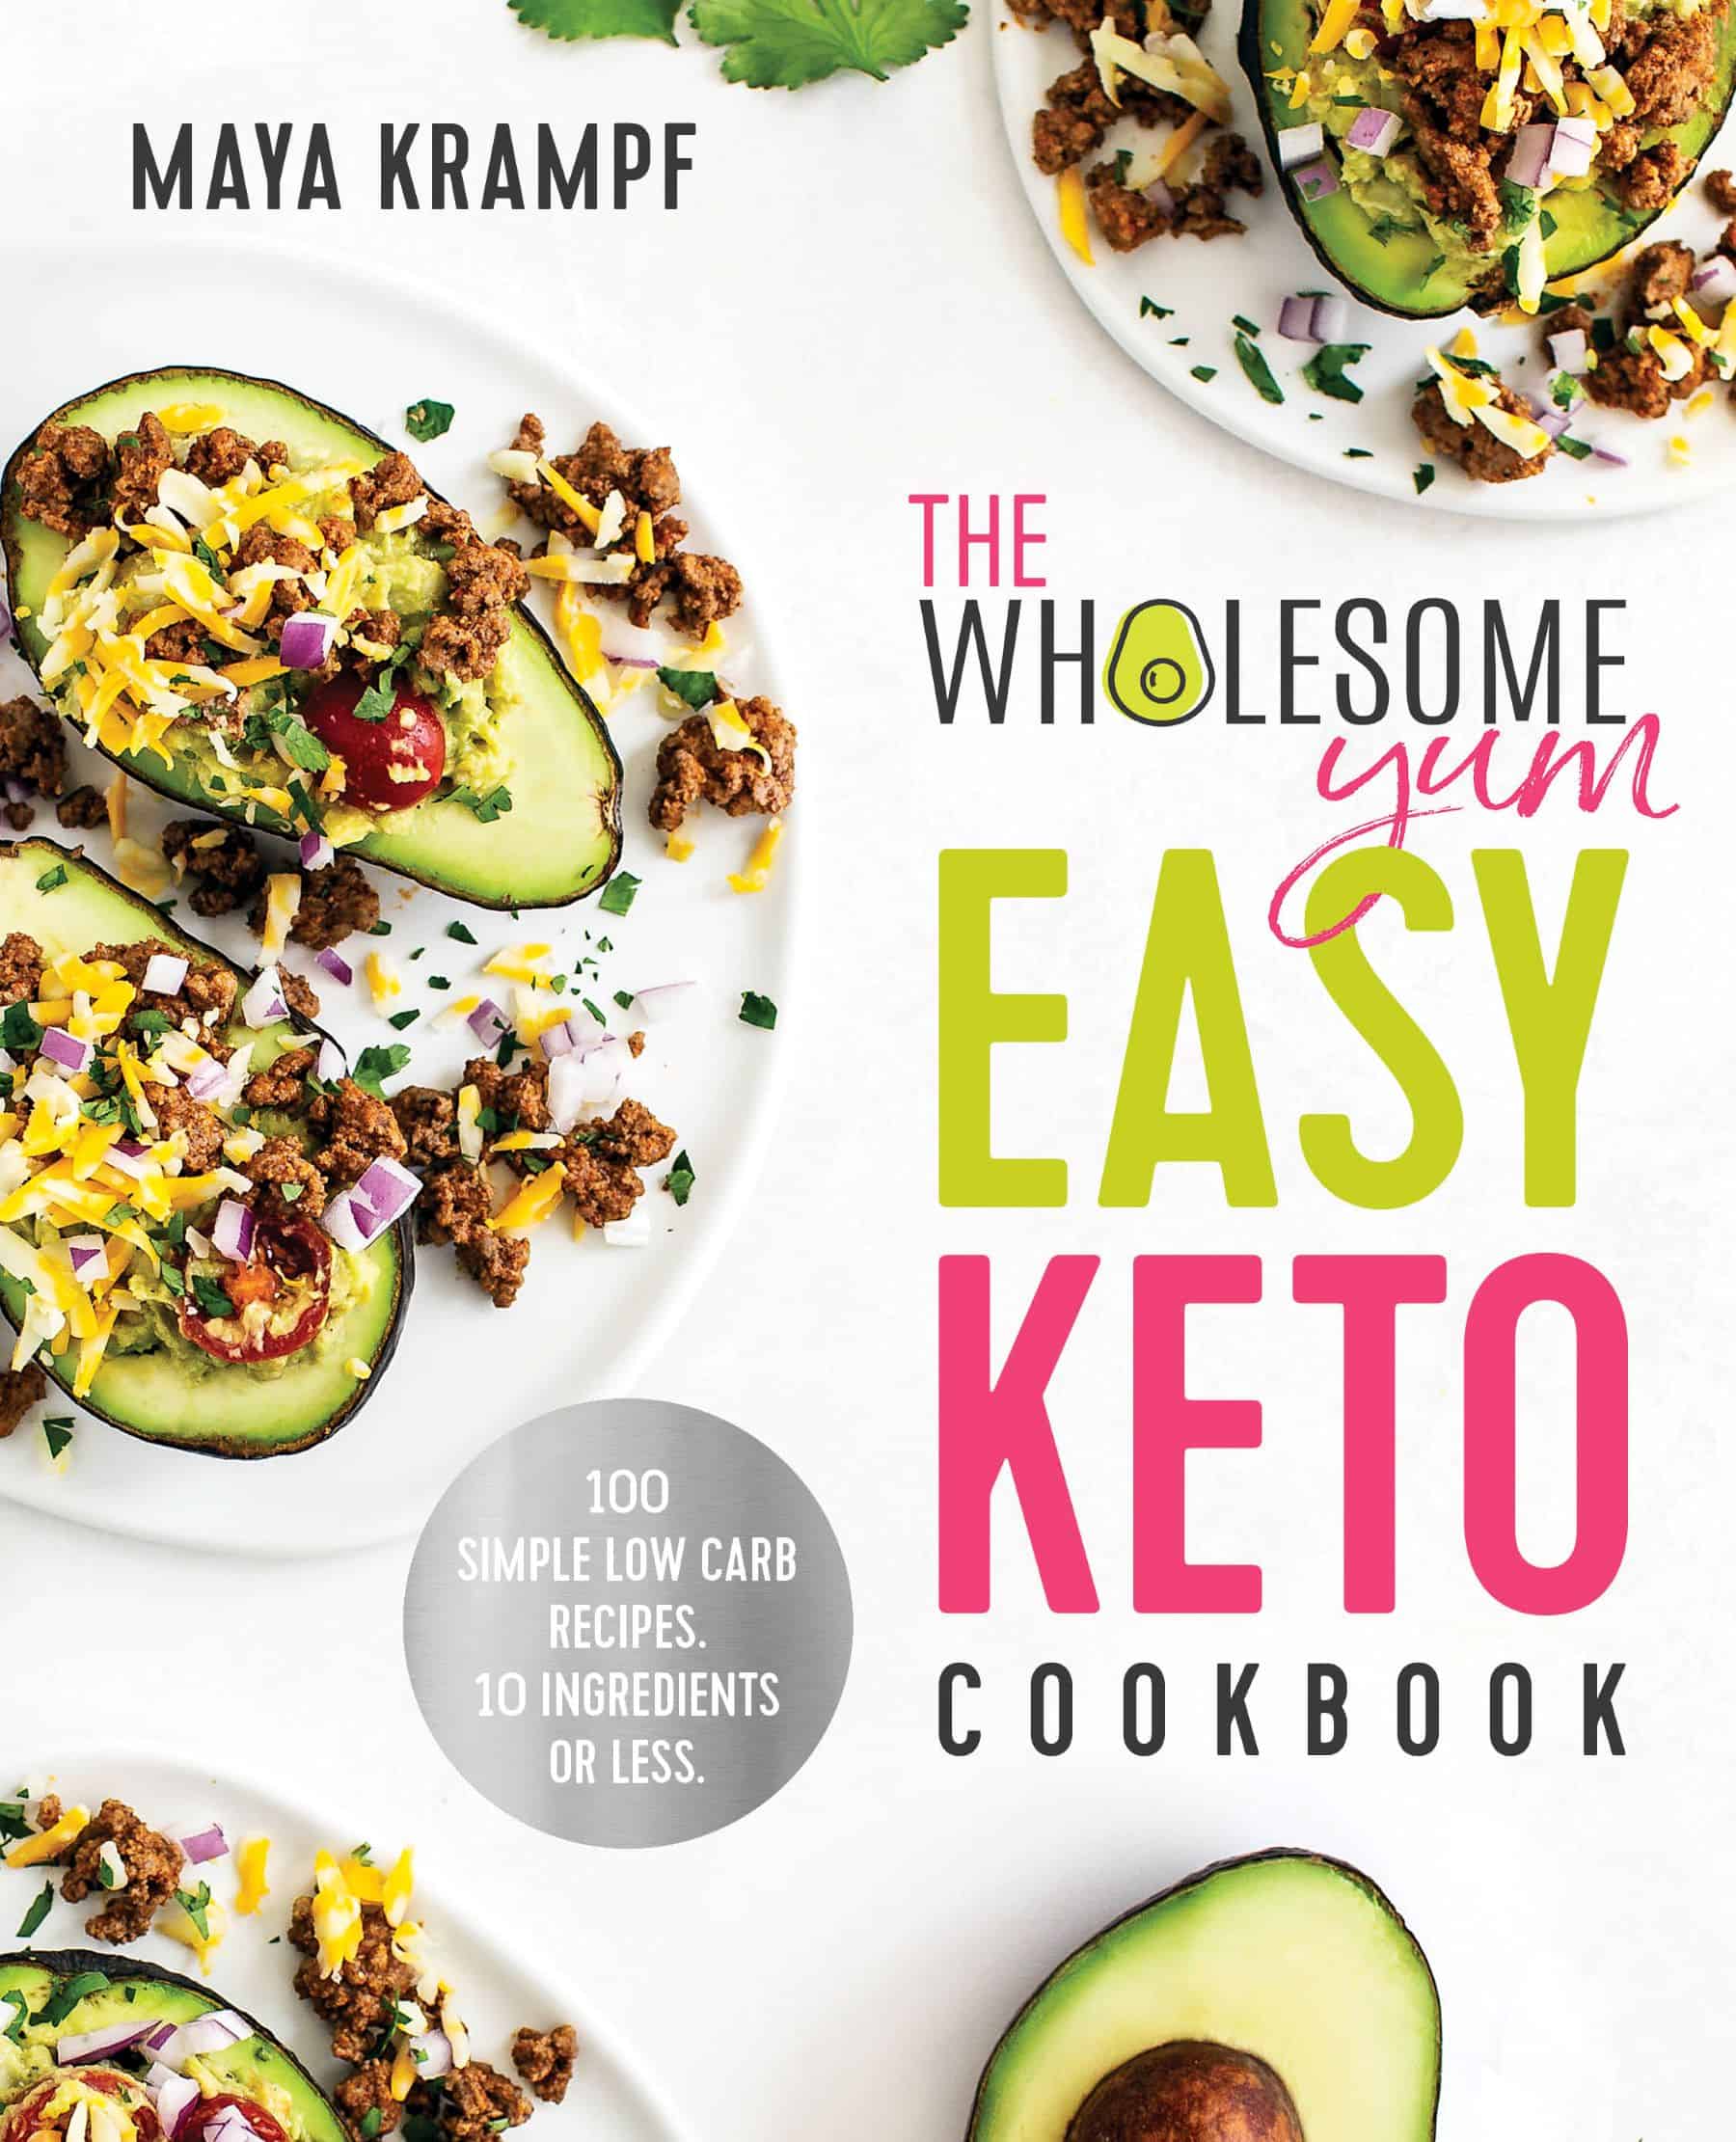 The Wholesome Yum Easy Keto Cookbook Image